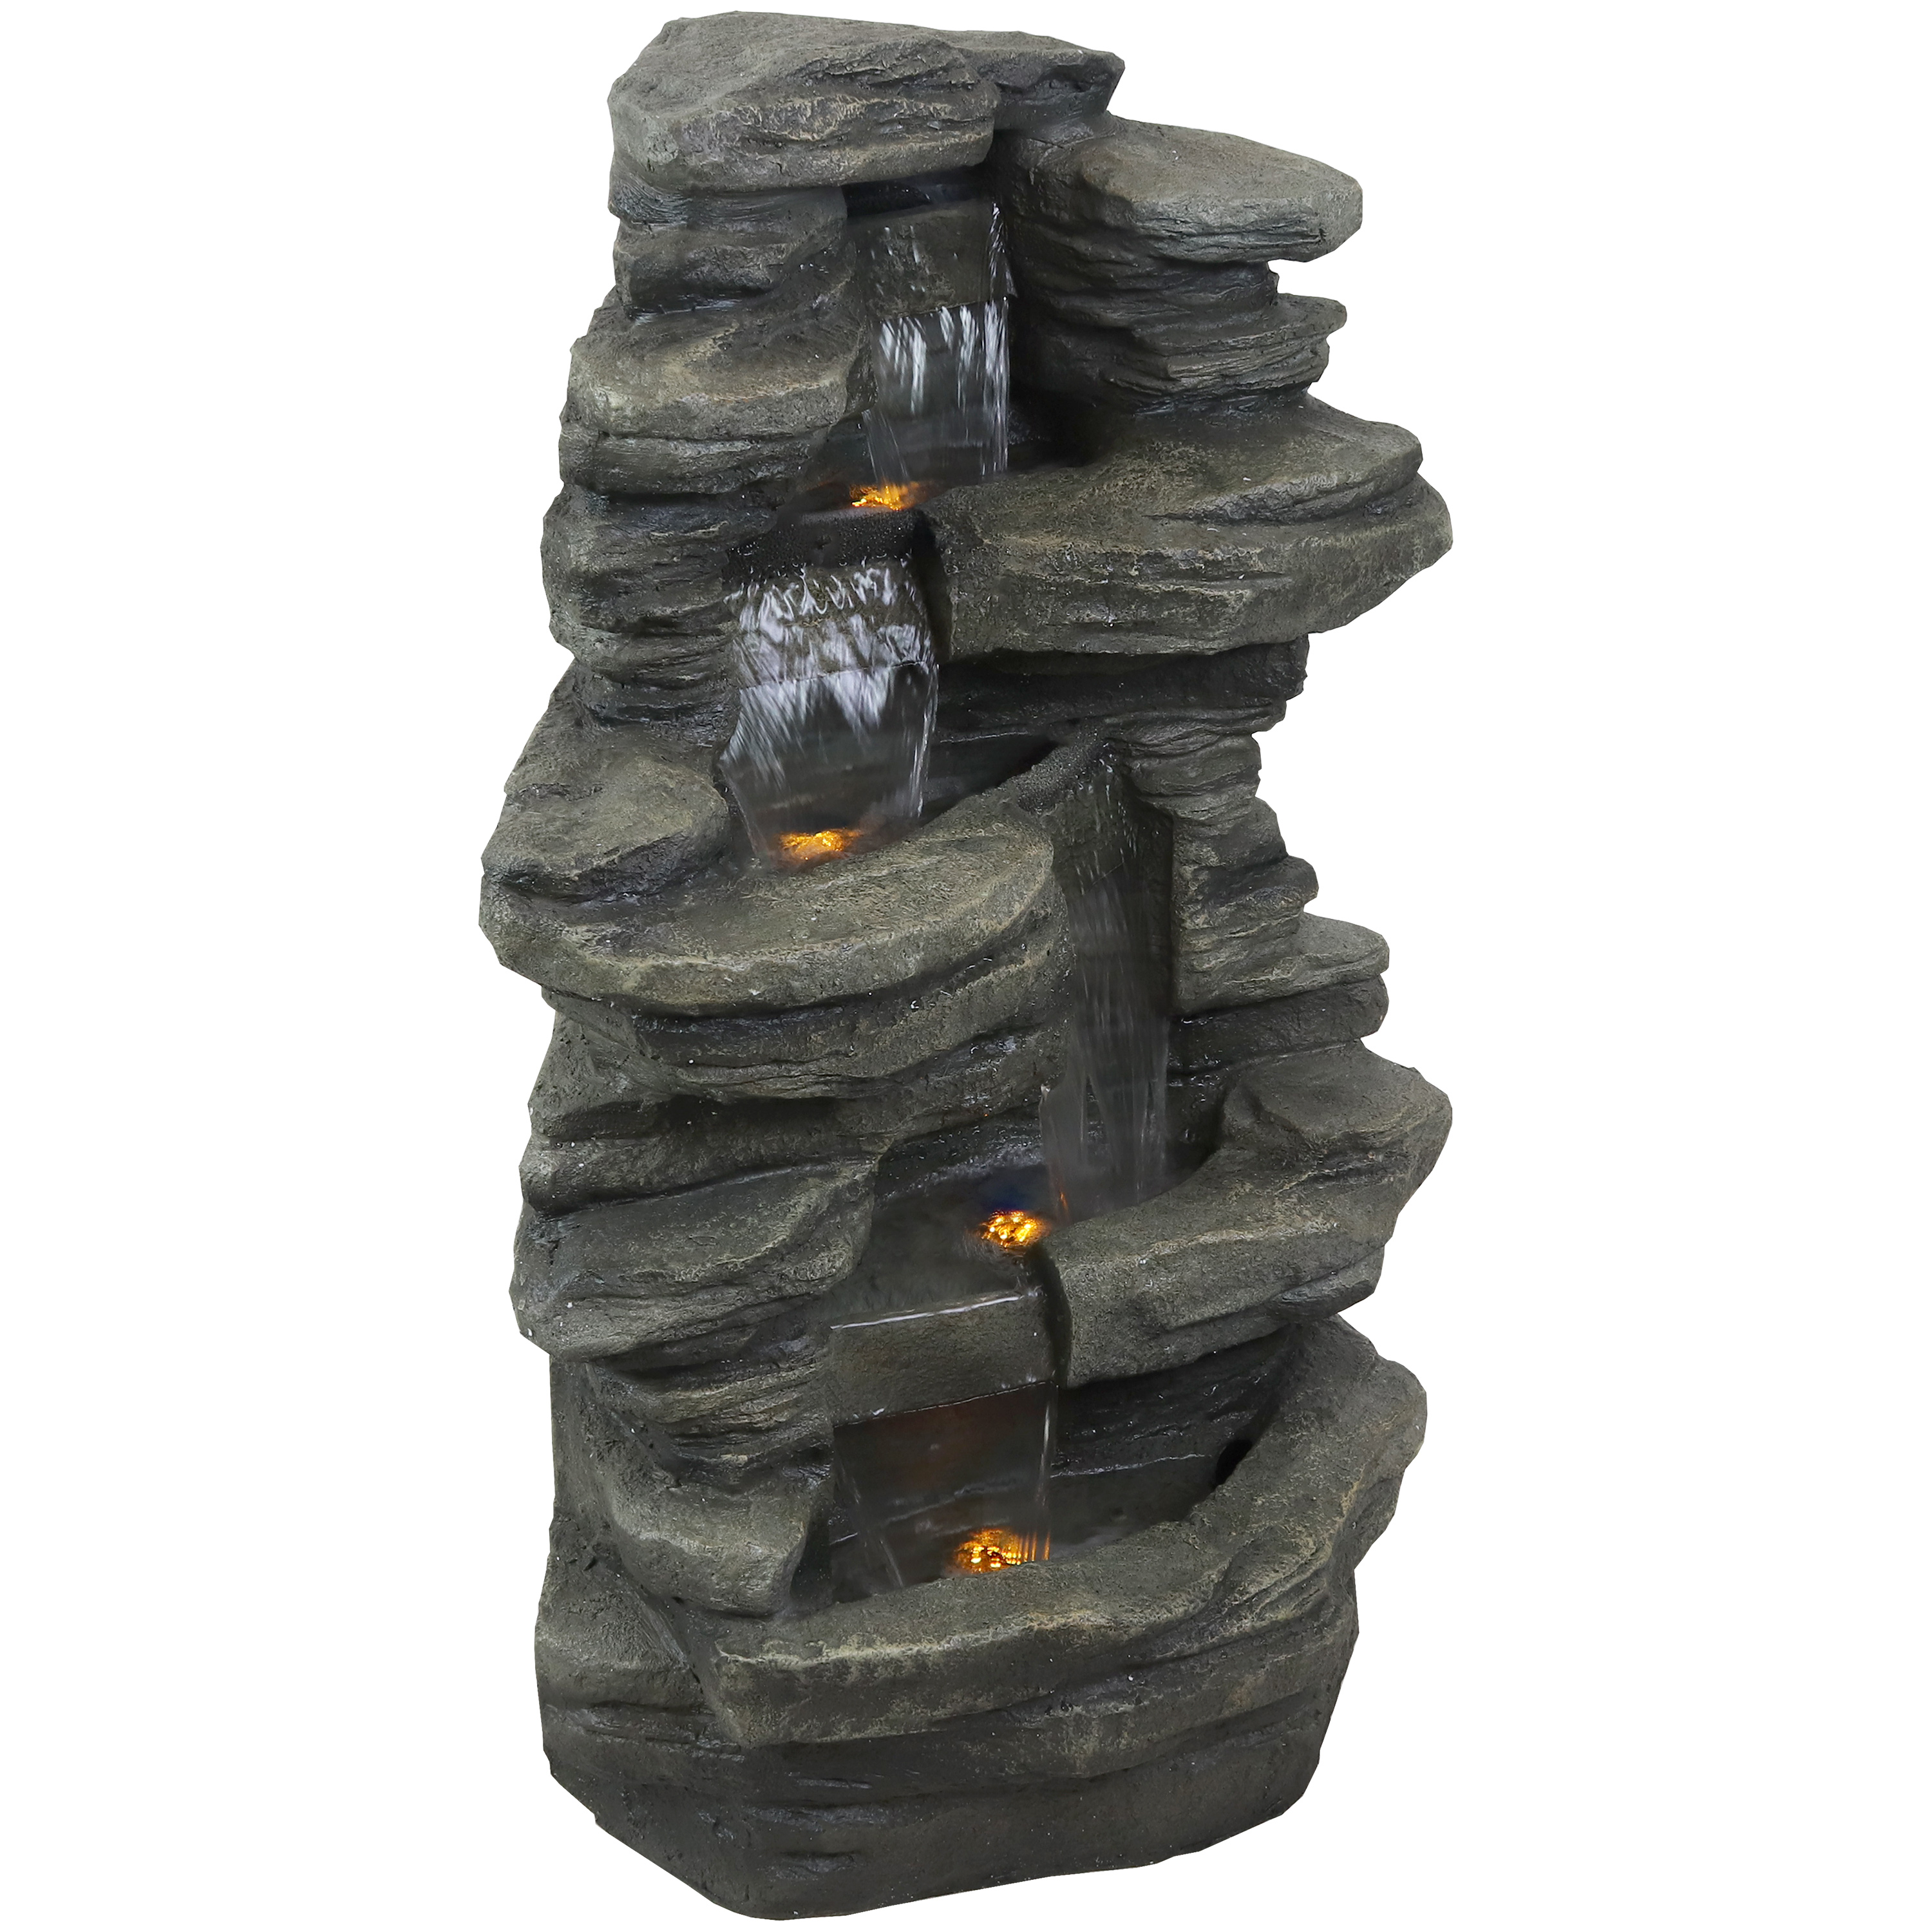 Sunnydaze Electric Stacked Shale Water Fountain with LED lights - 38-Inch